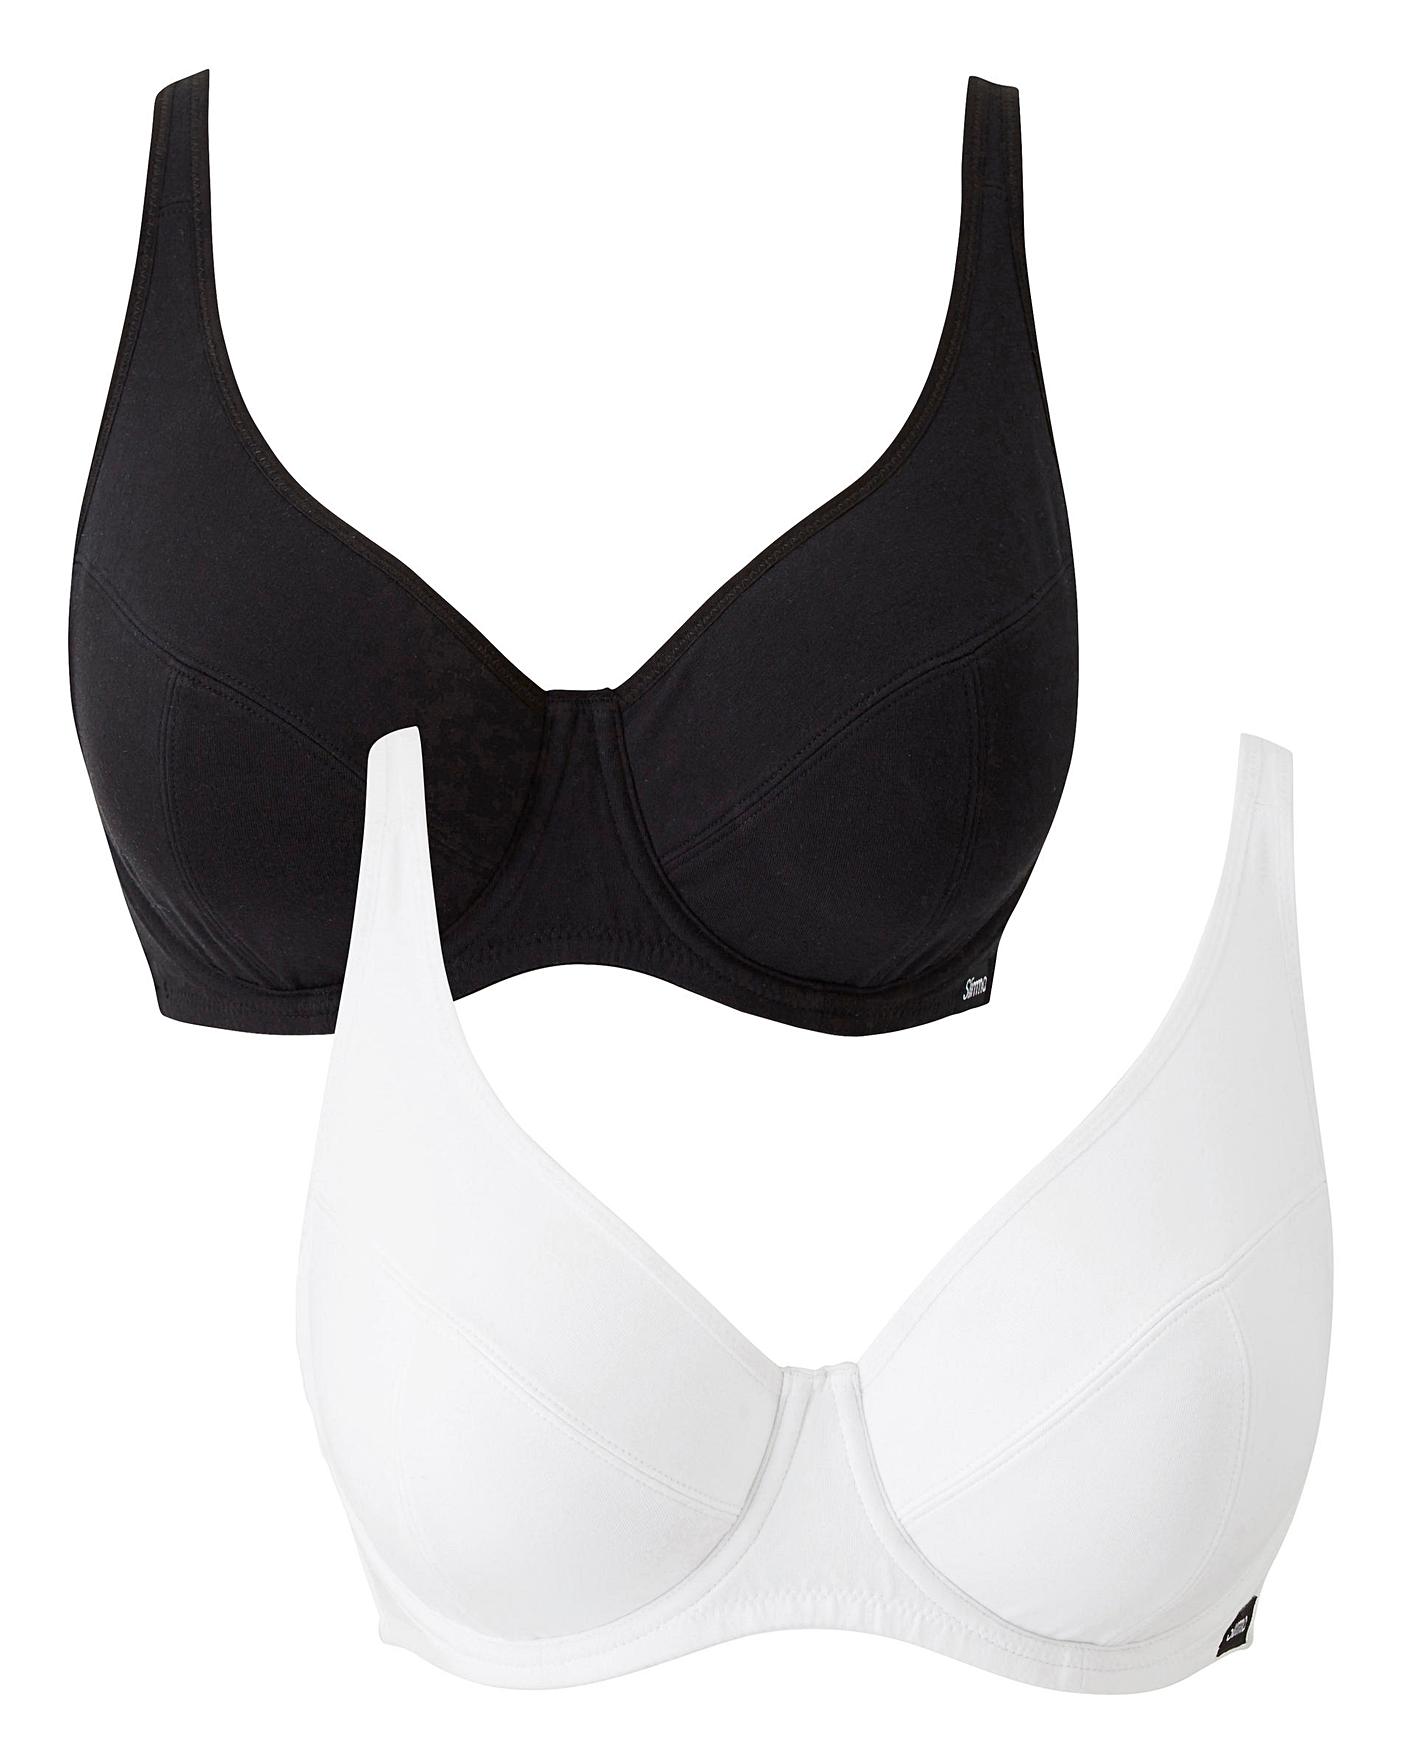 Slimma 2 Pack Cotton Full Cup Bras | Ambrose Wilson